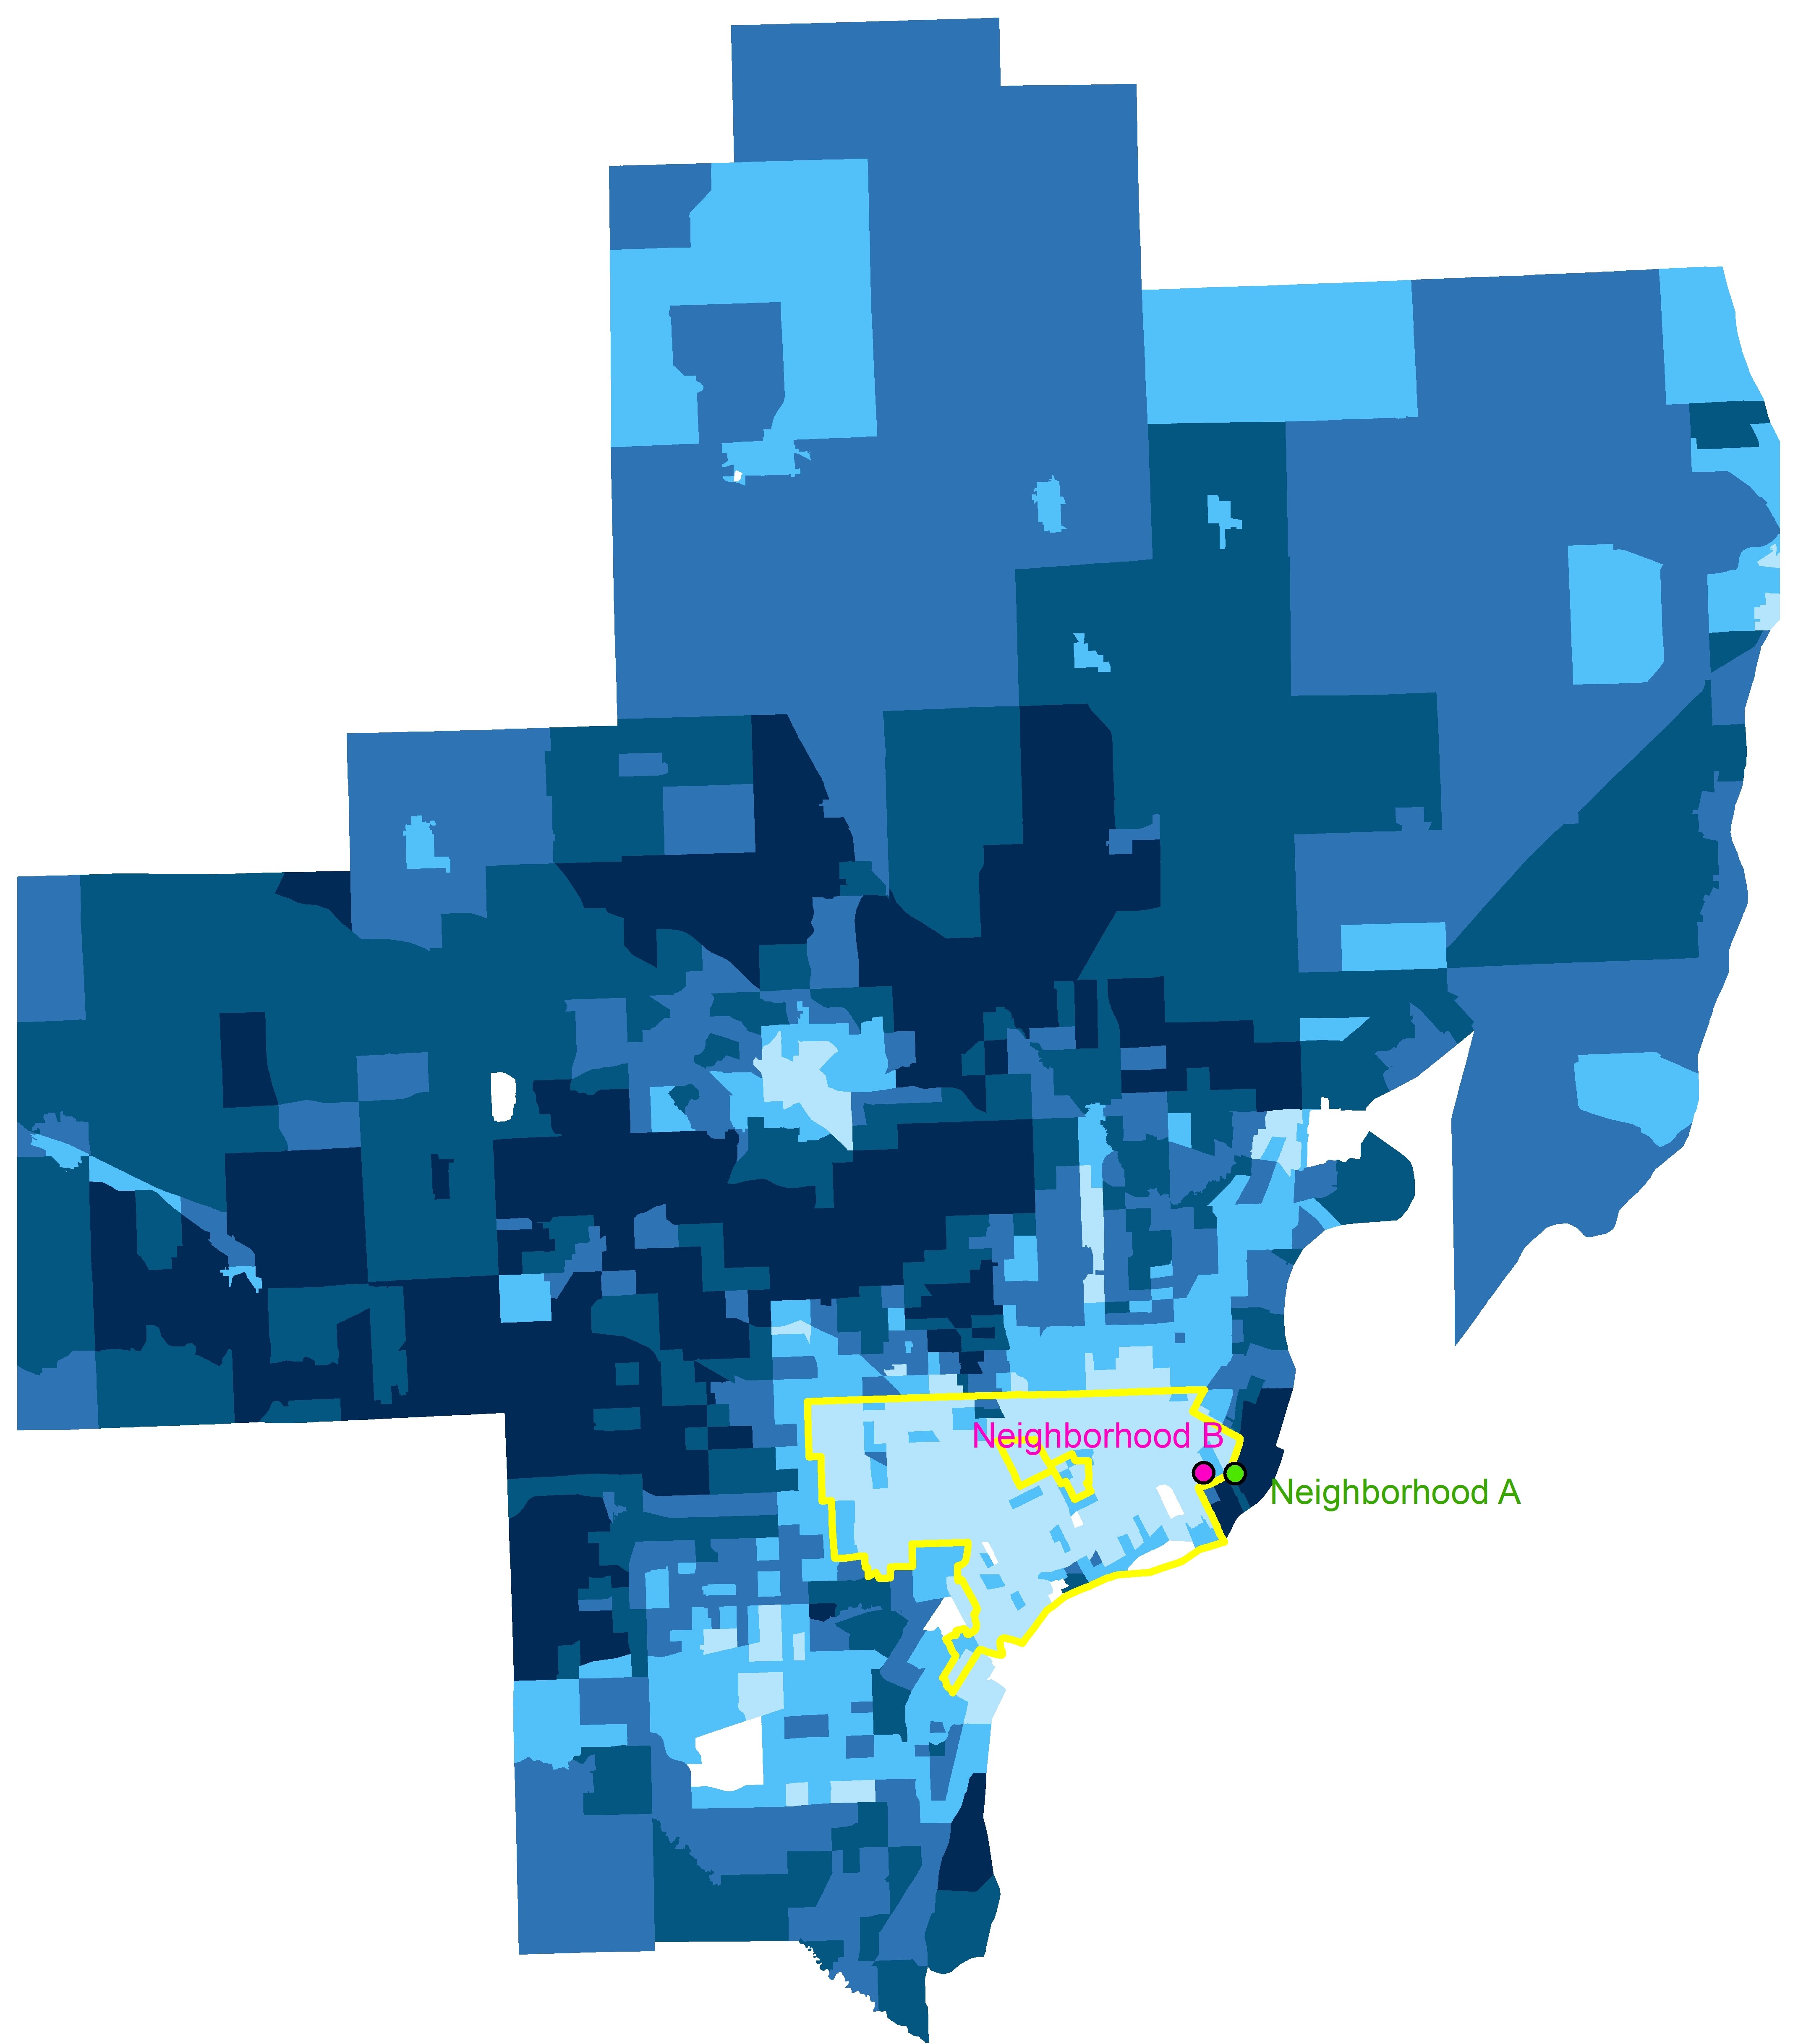 Map showing Child Opportunity Levels in Detroit